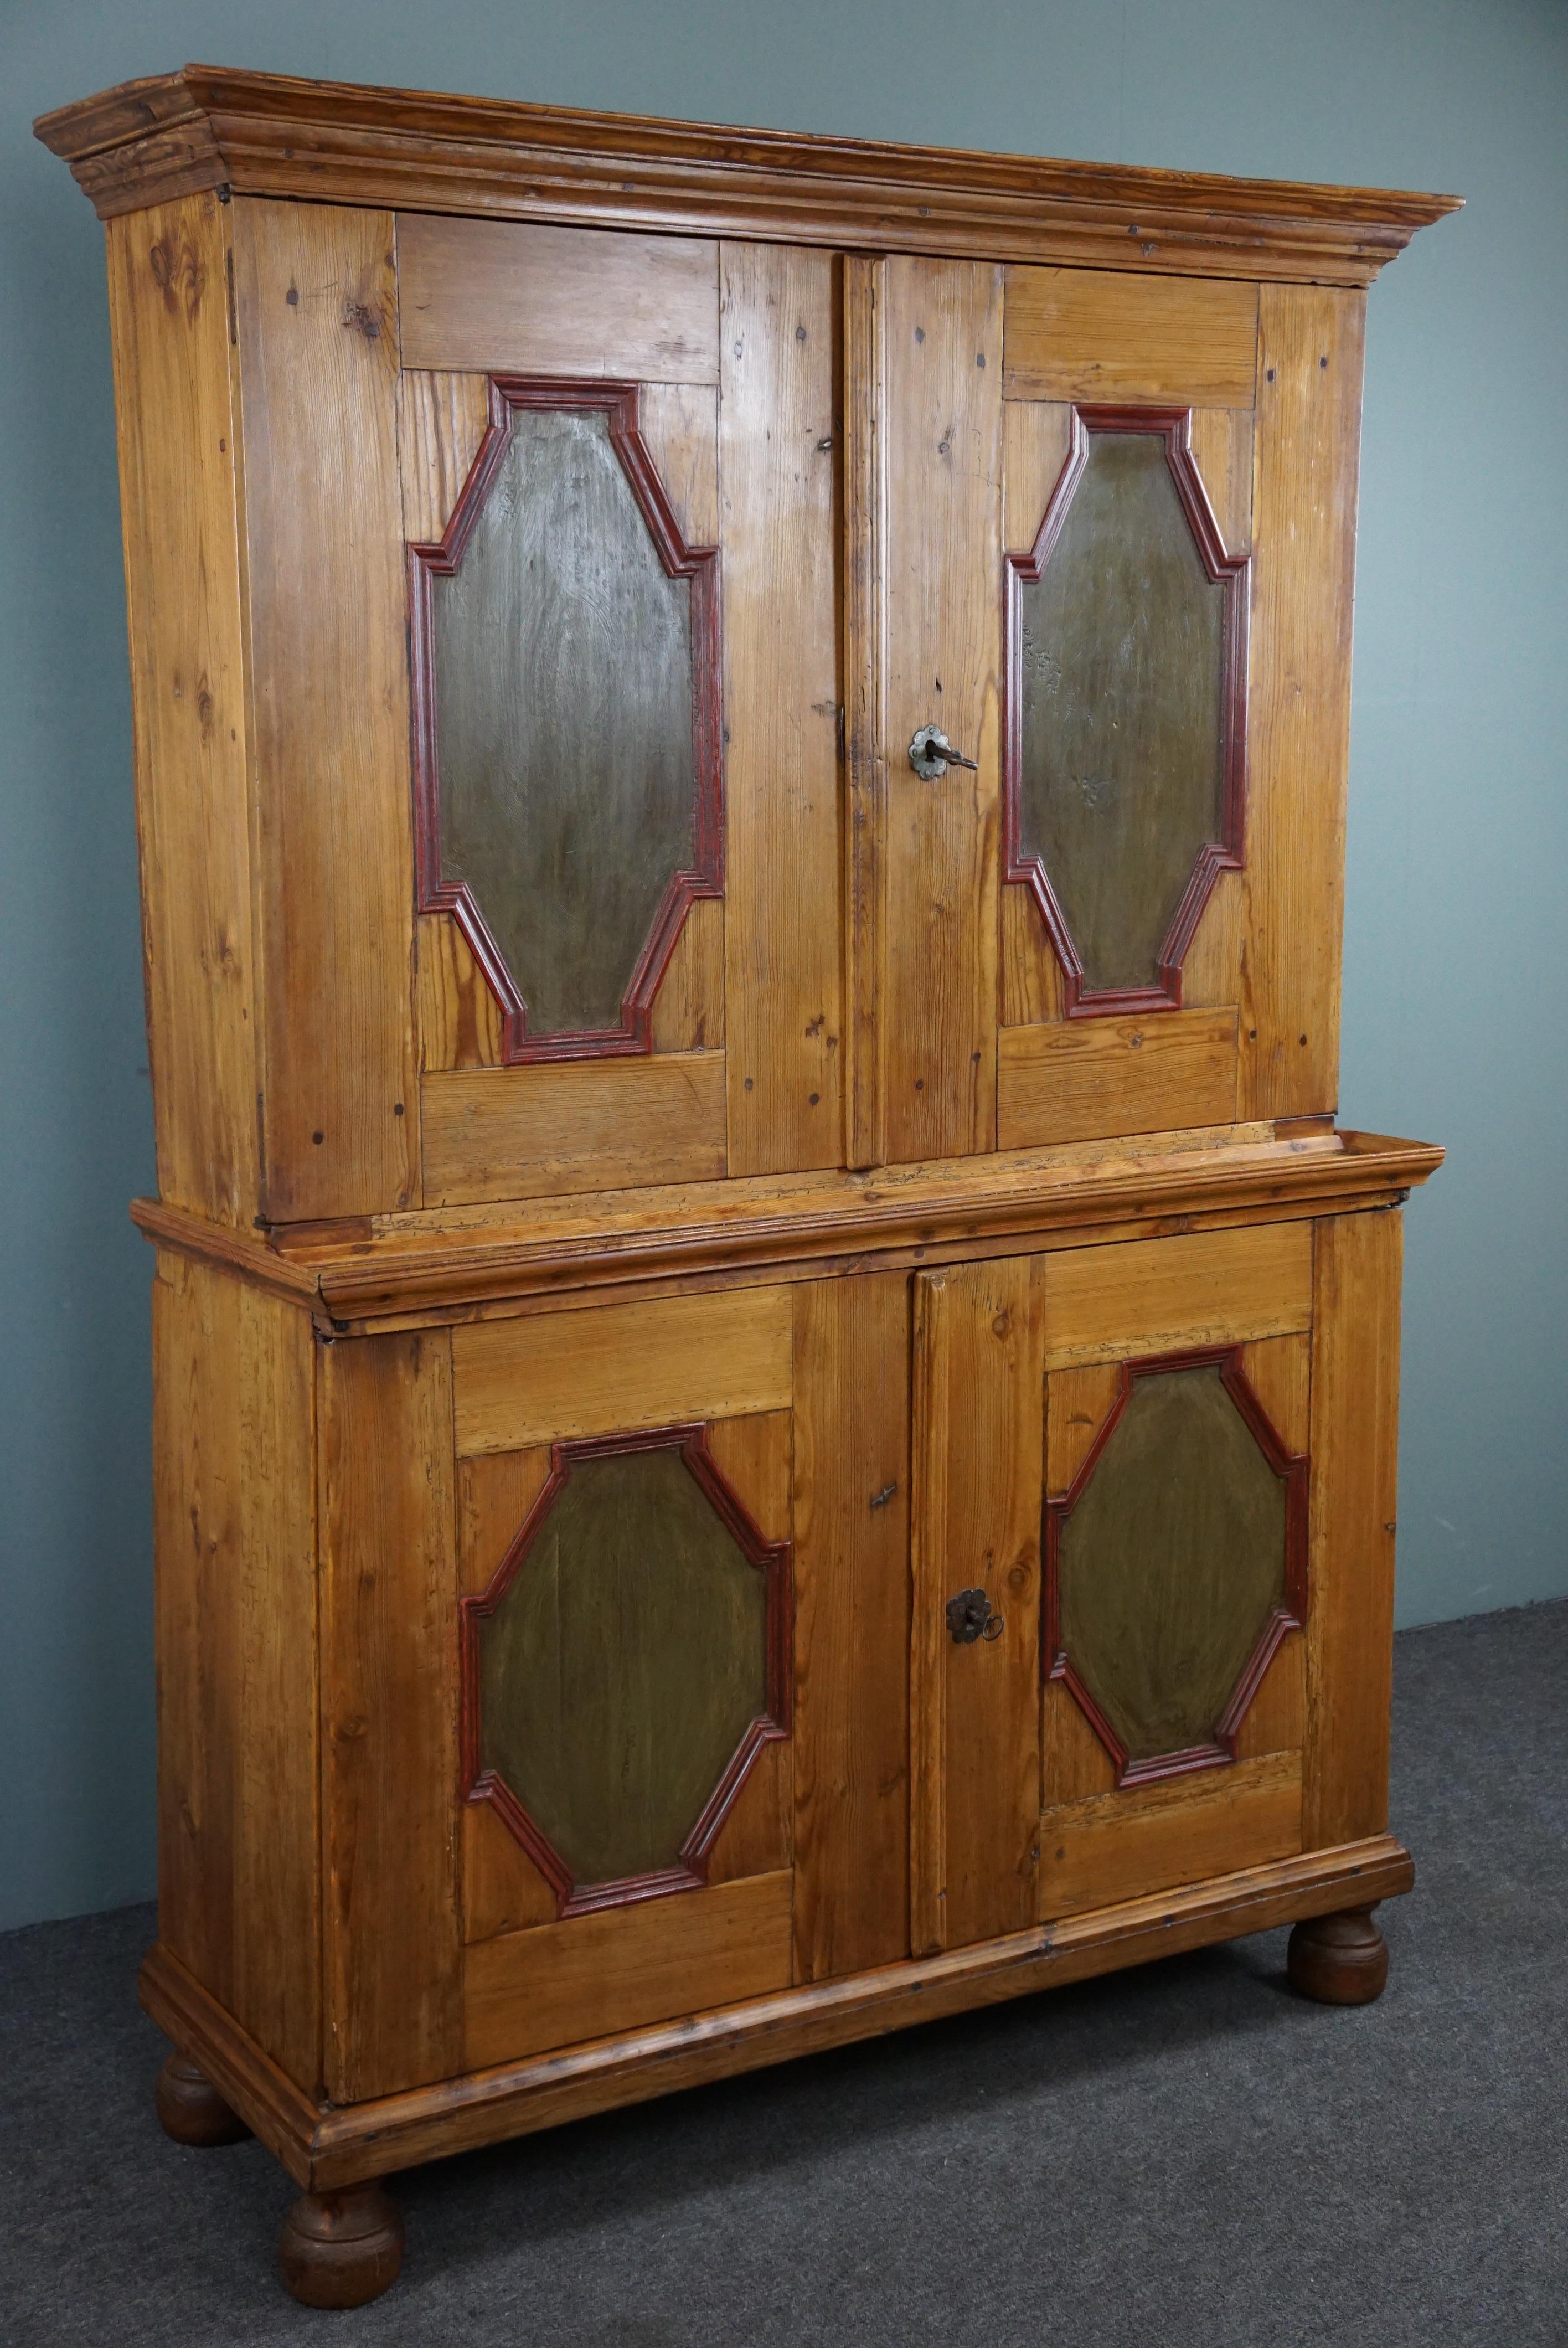 Offered is this antique folk art buffet cabinet with a practical layout and shelves. Explore our splendid pine buffet cabinet (made in 1840-1860) with painted doors, practical shelves, and layout that will add a touch of rustic charm and